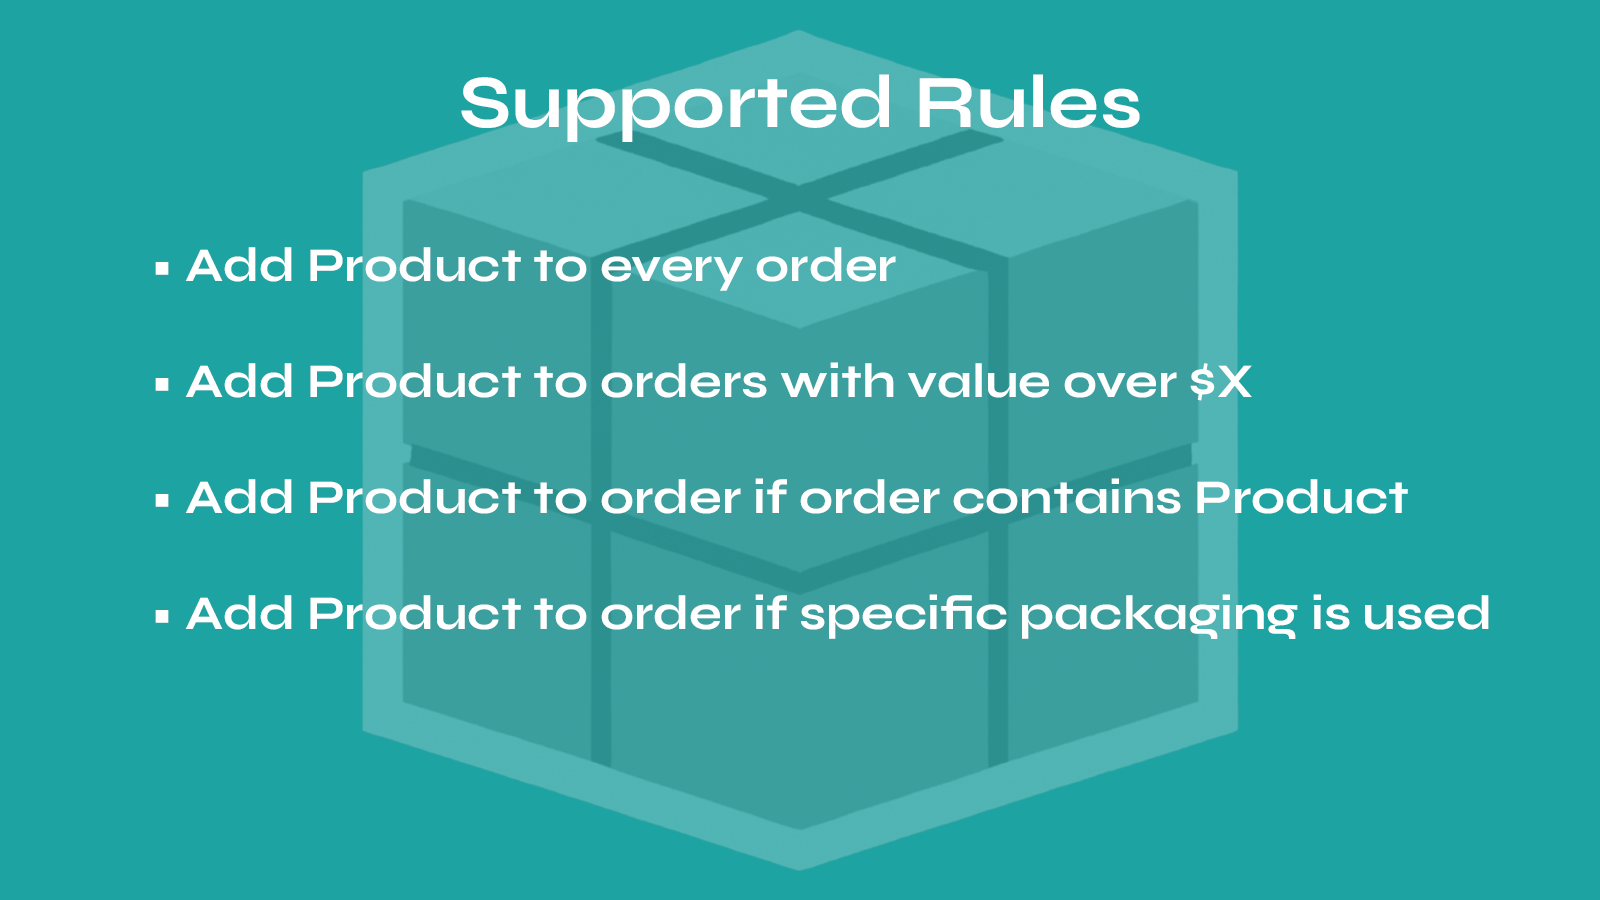 The supported rules for adding products to orders